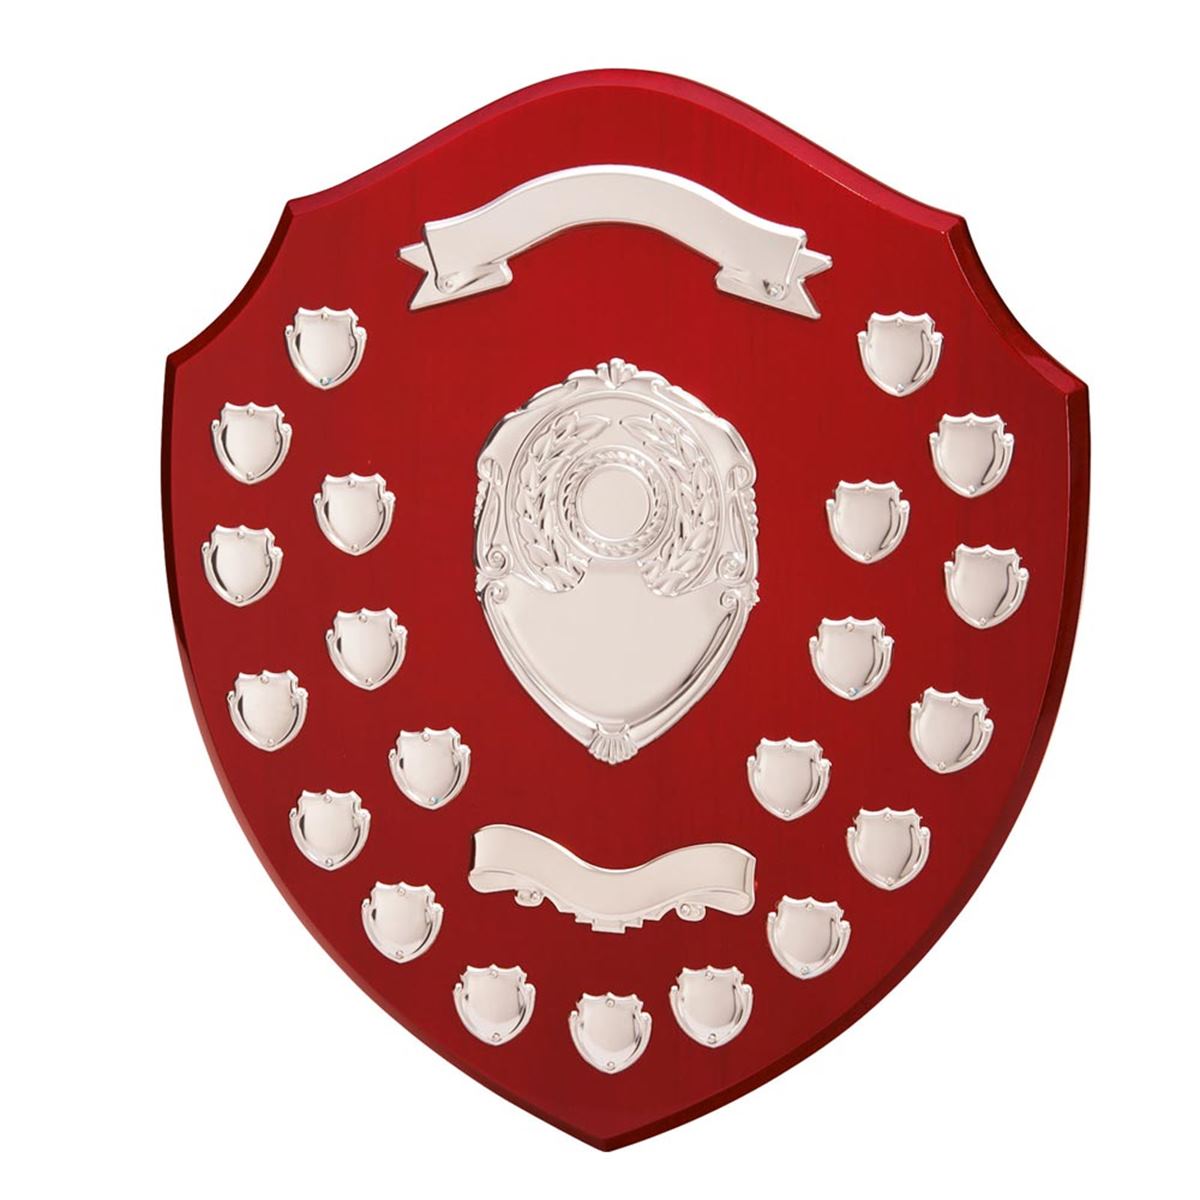 The Supreme Rosewood Annual Shield Award - 21 Side Shields